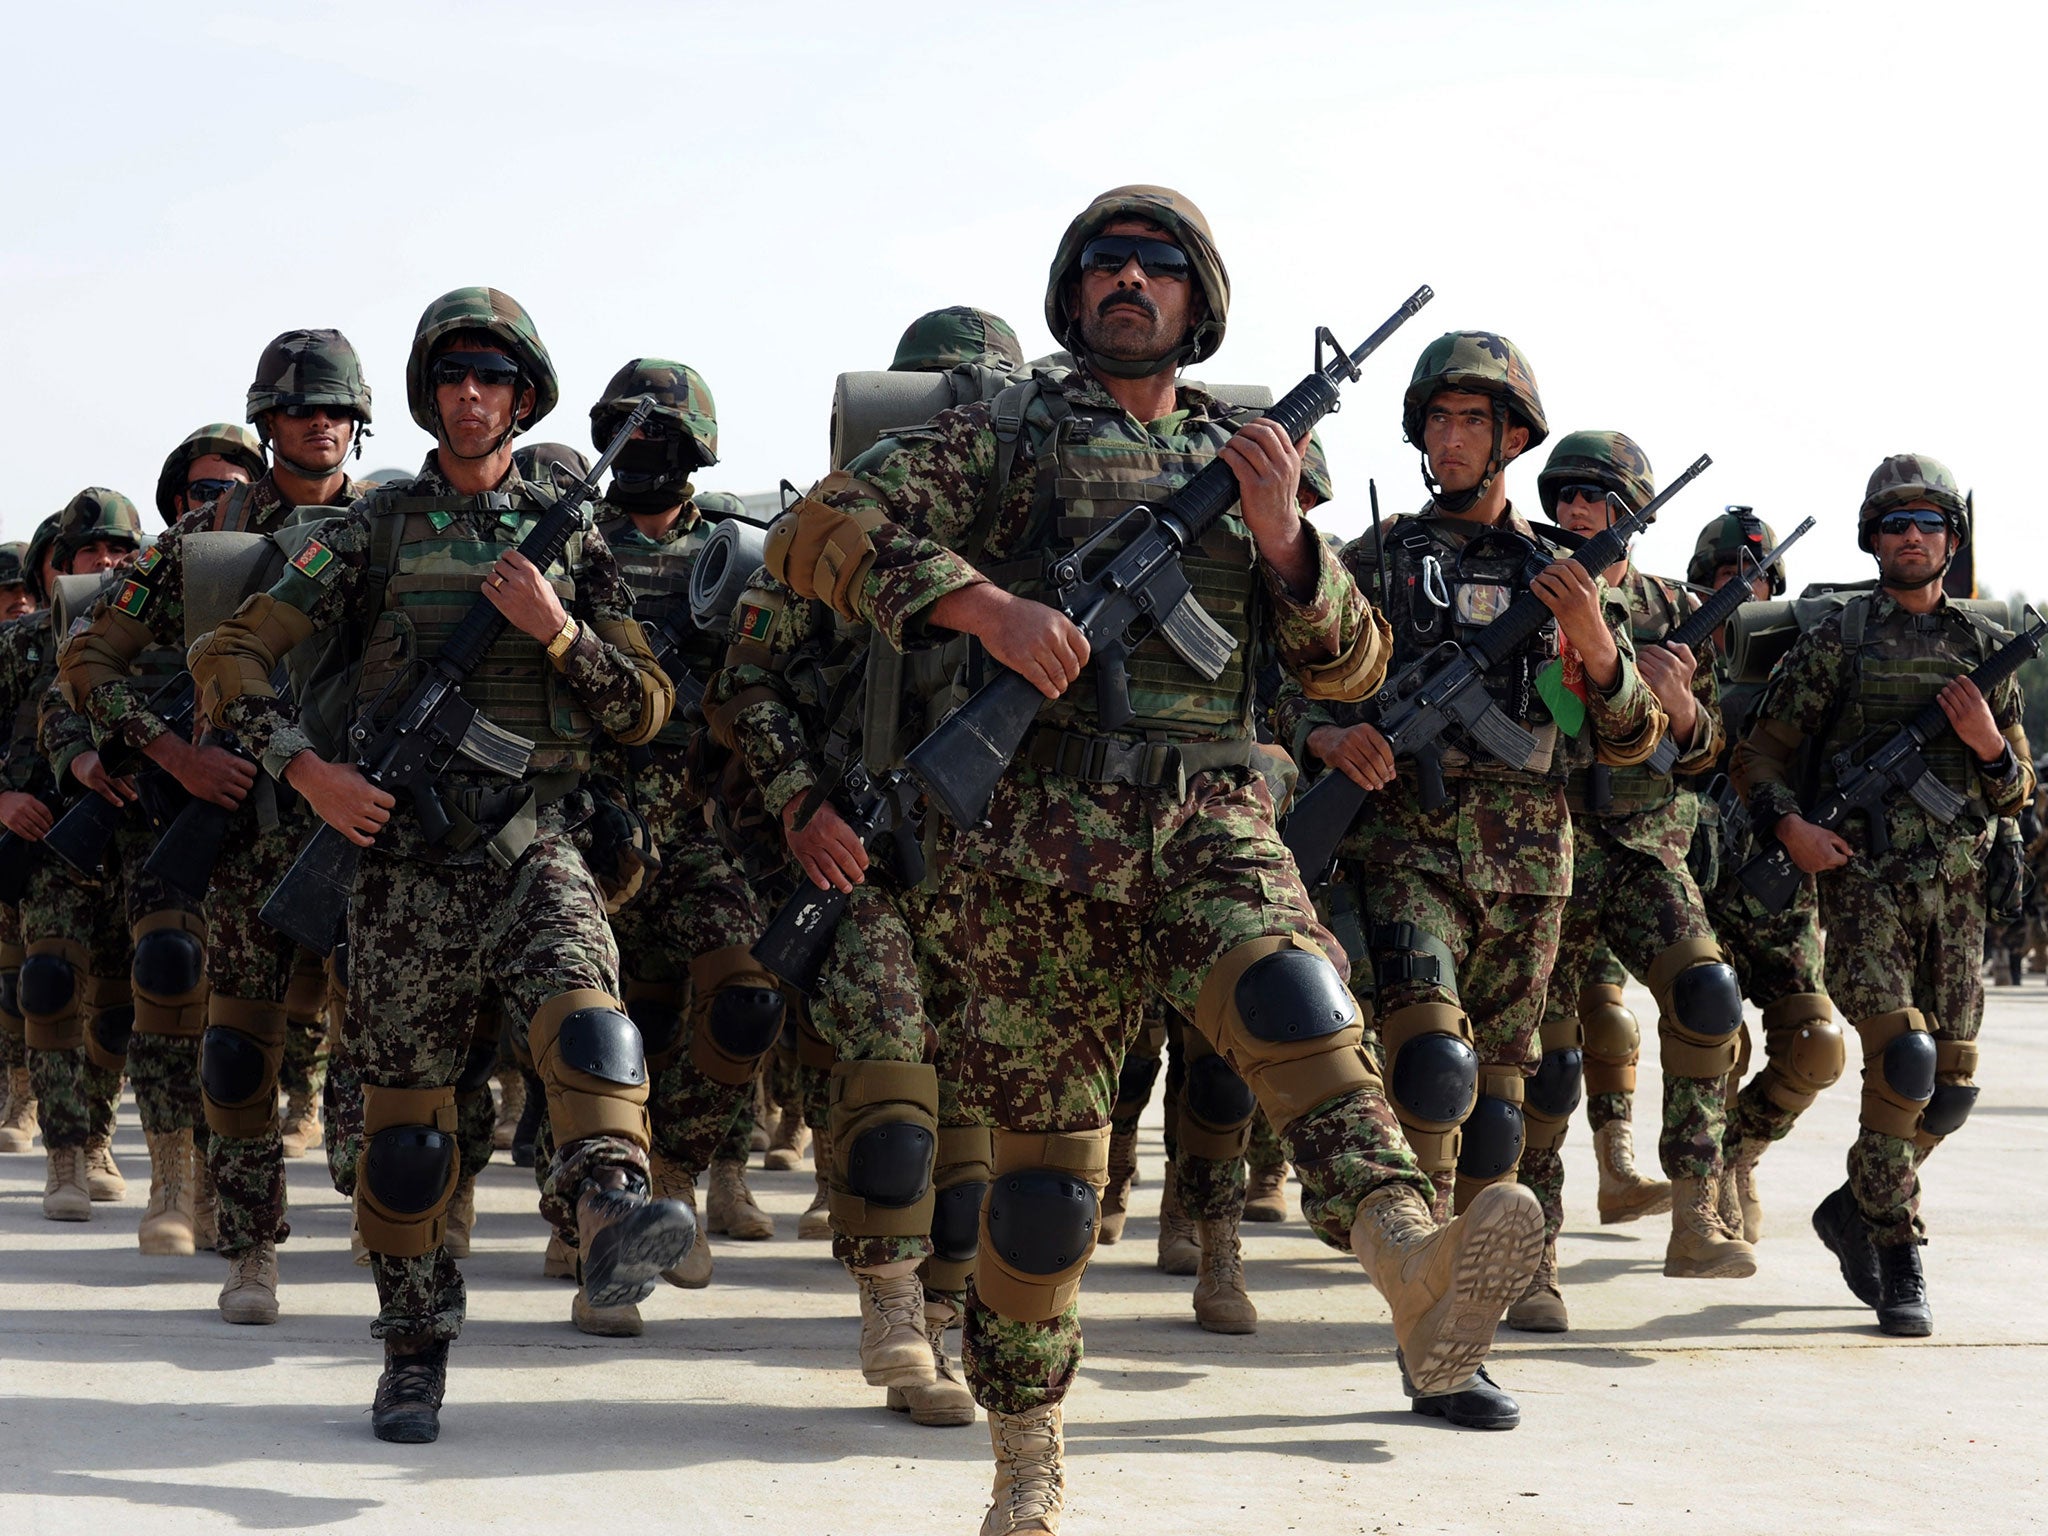 Afghan National Army soldiers march during a handover ceremony of NATO's International Security Assistance Force (ISAF) in Kandahar province on January 11, 2015